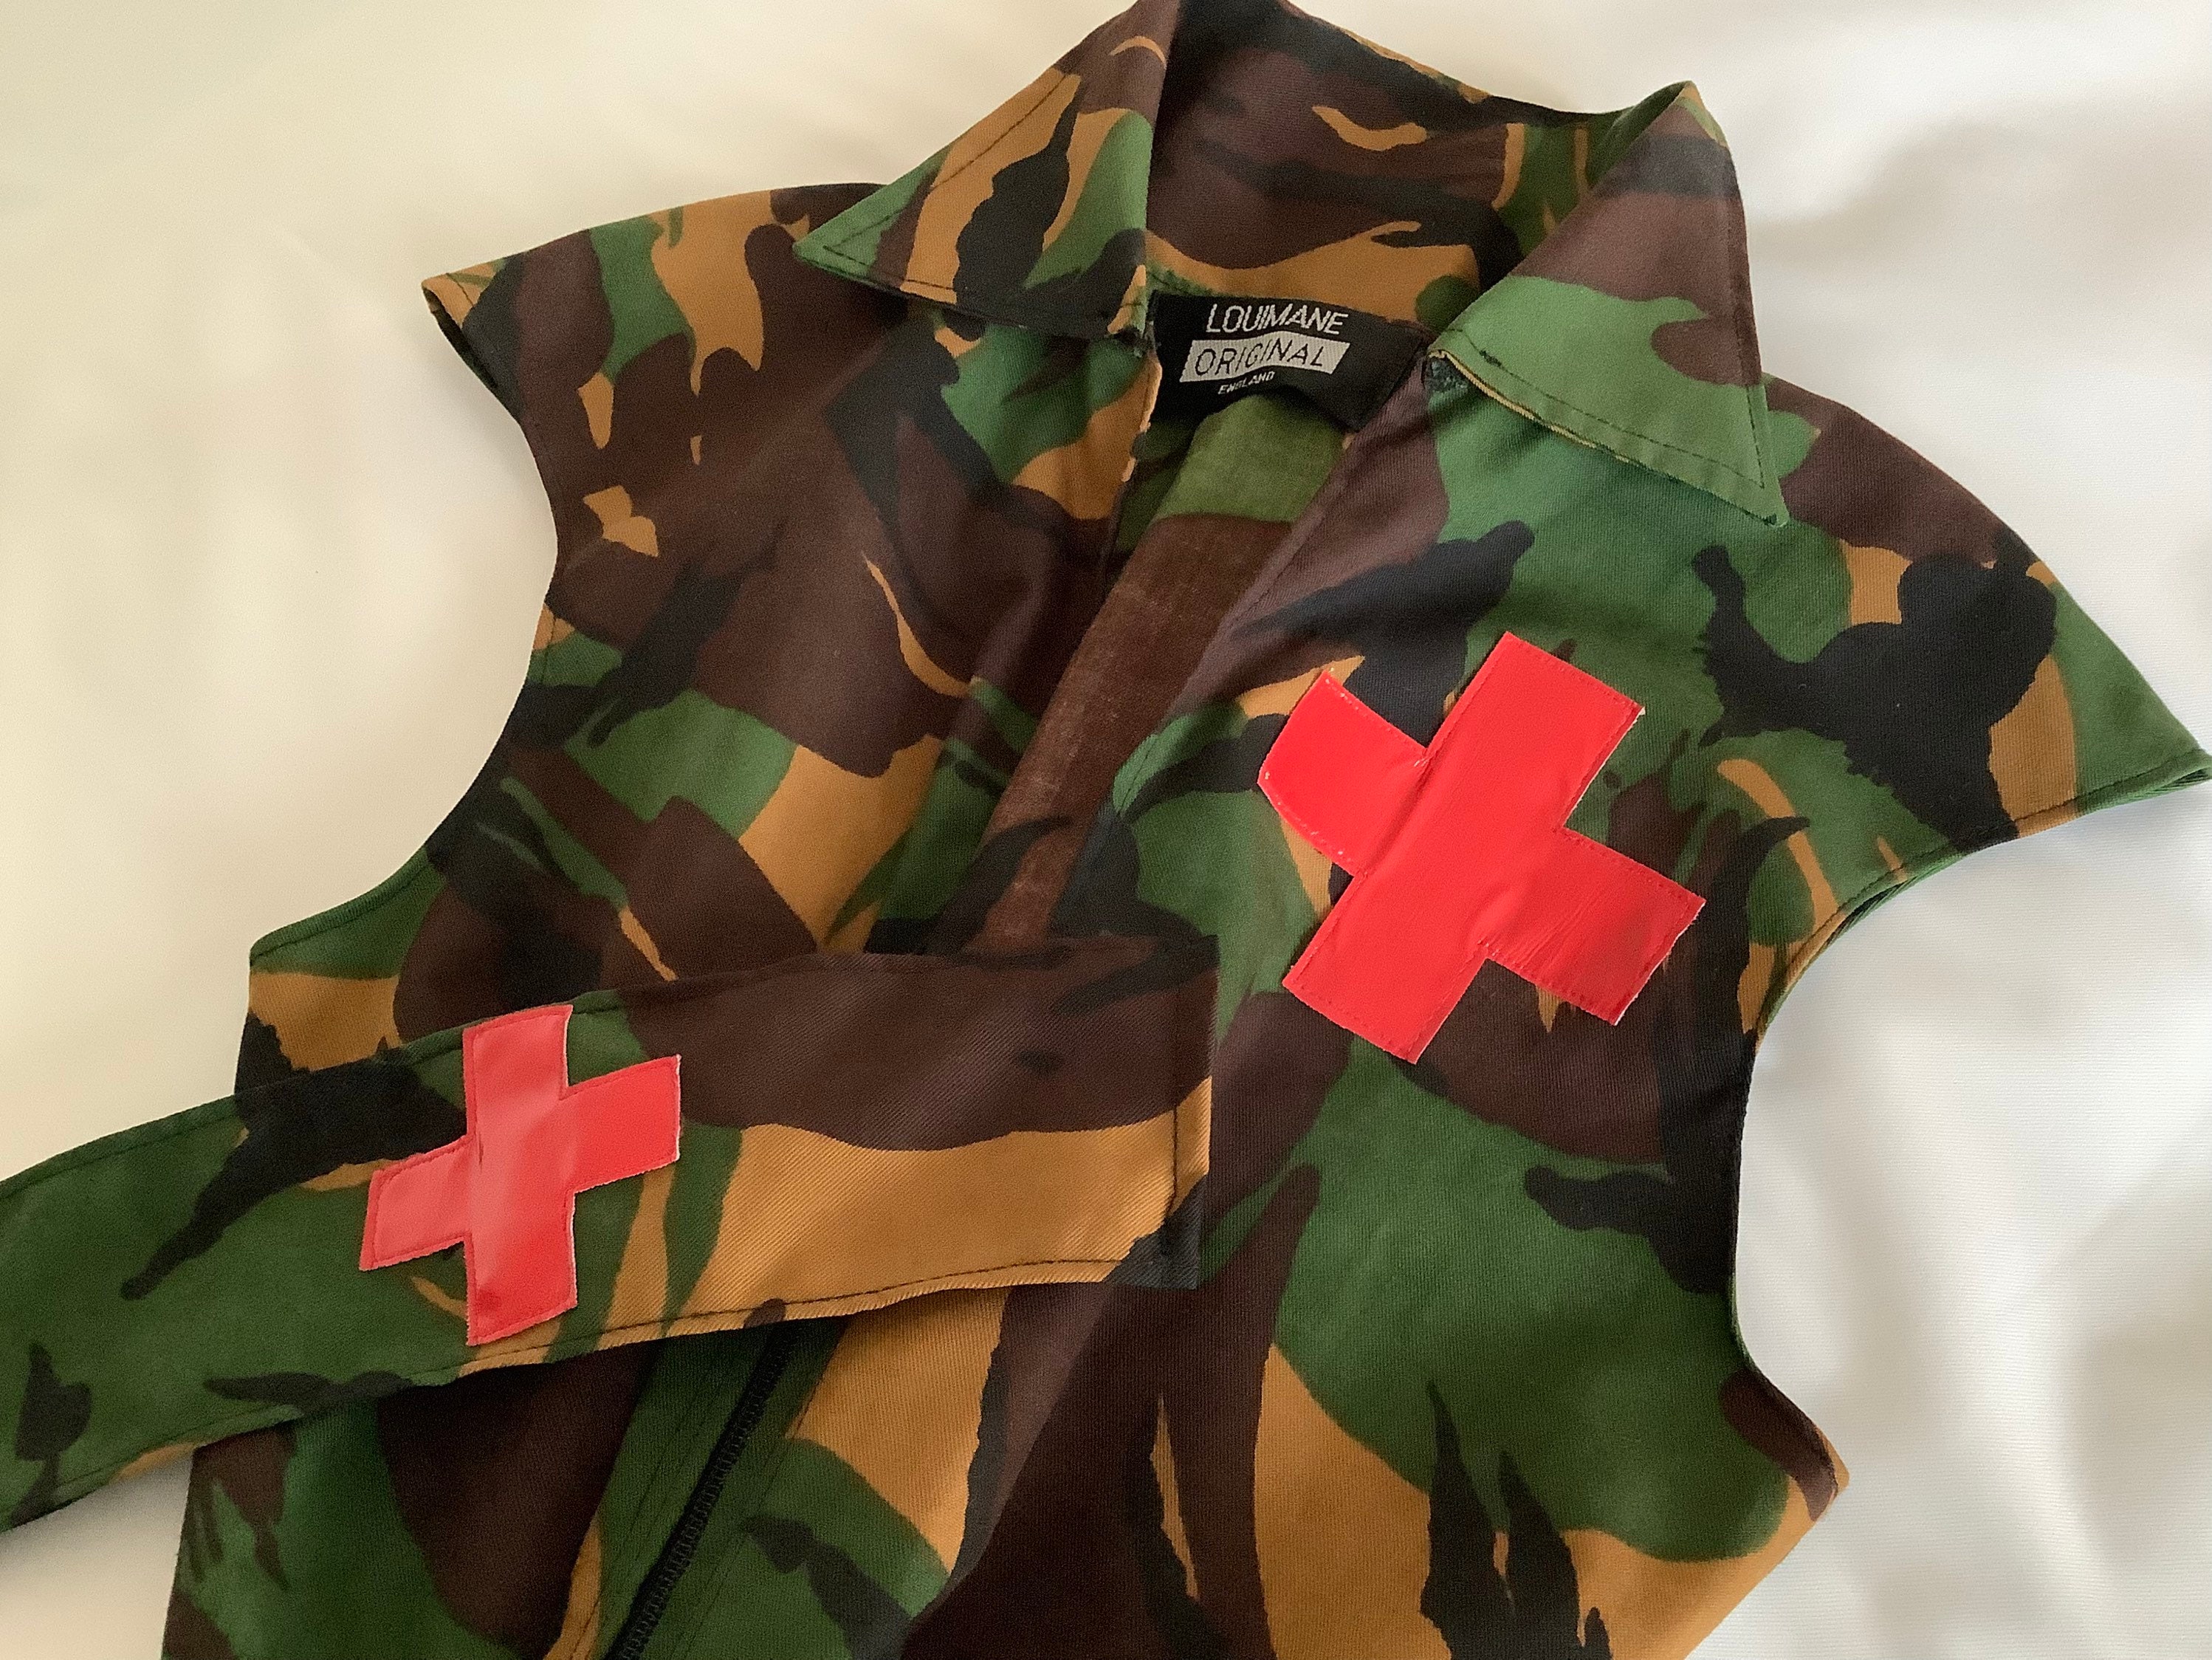 Adult Command Attention Military Women Costume, $55.99